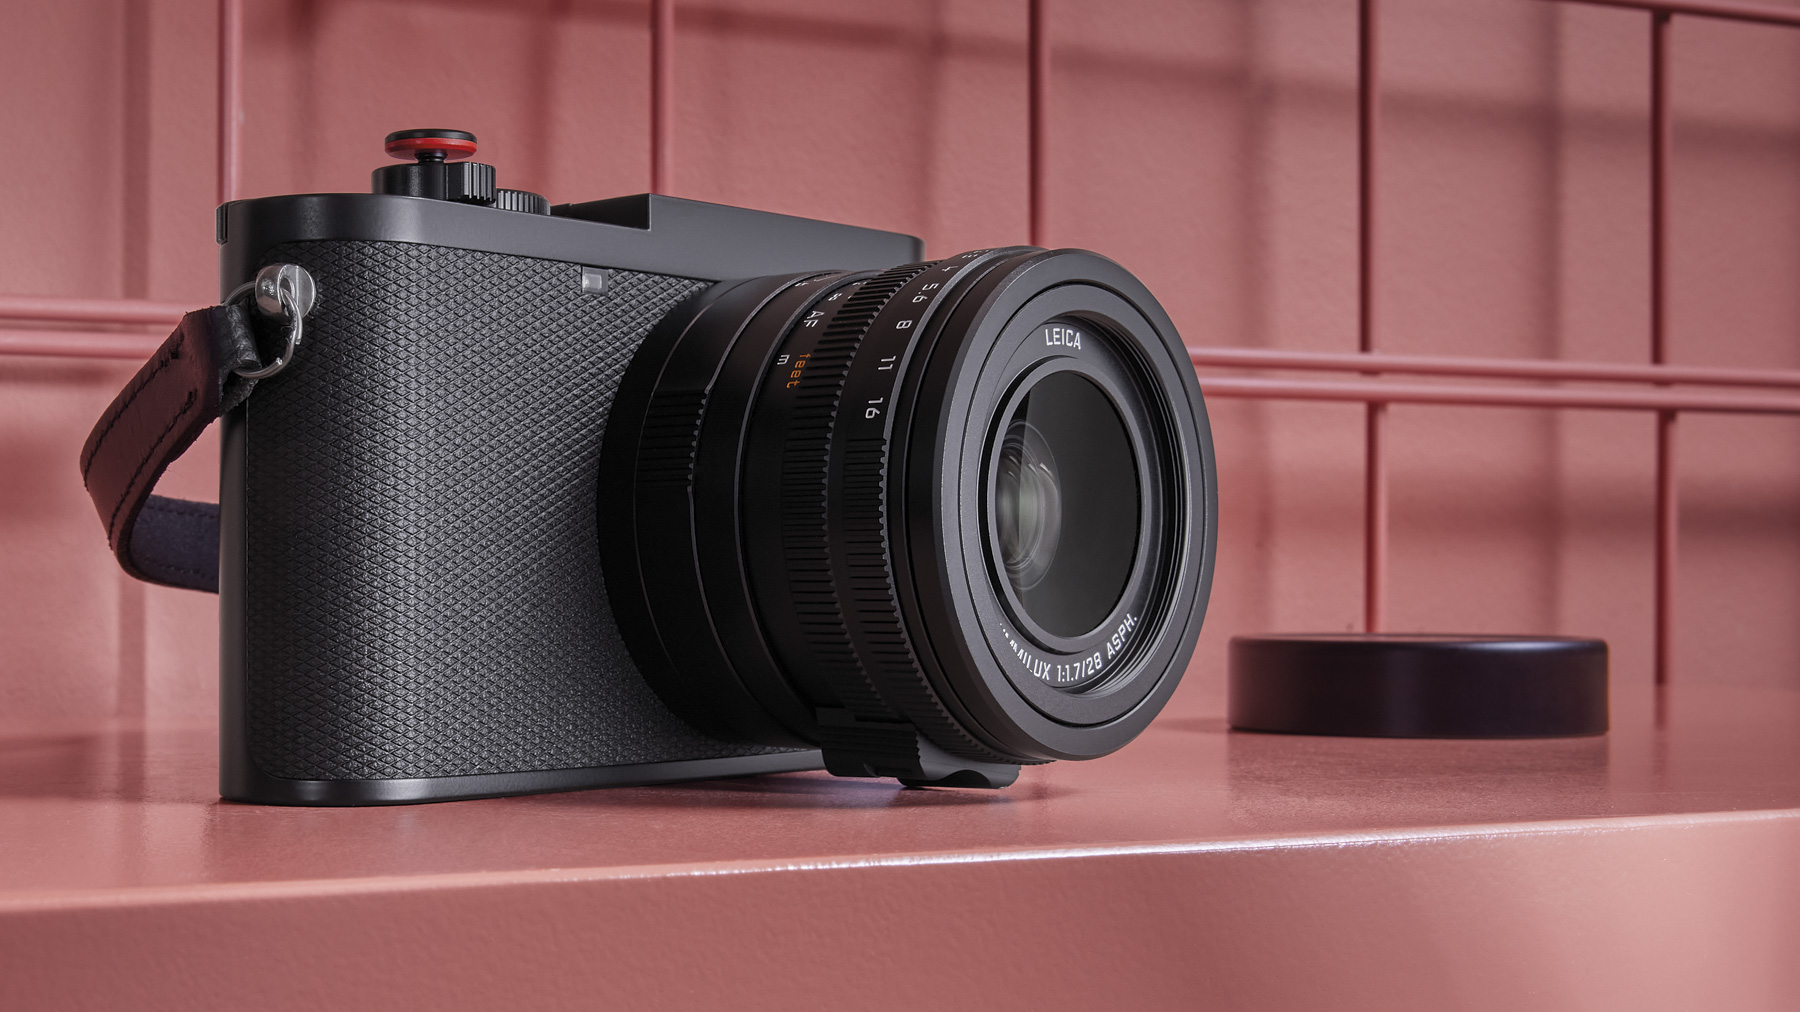 The Leica Q3 is here – and it’s definitely the Leica I’d buy if I was rich